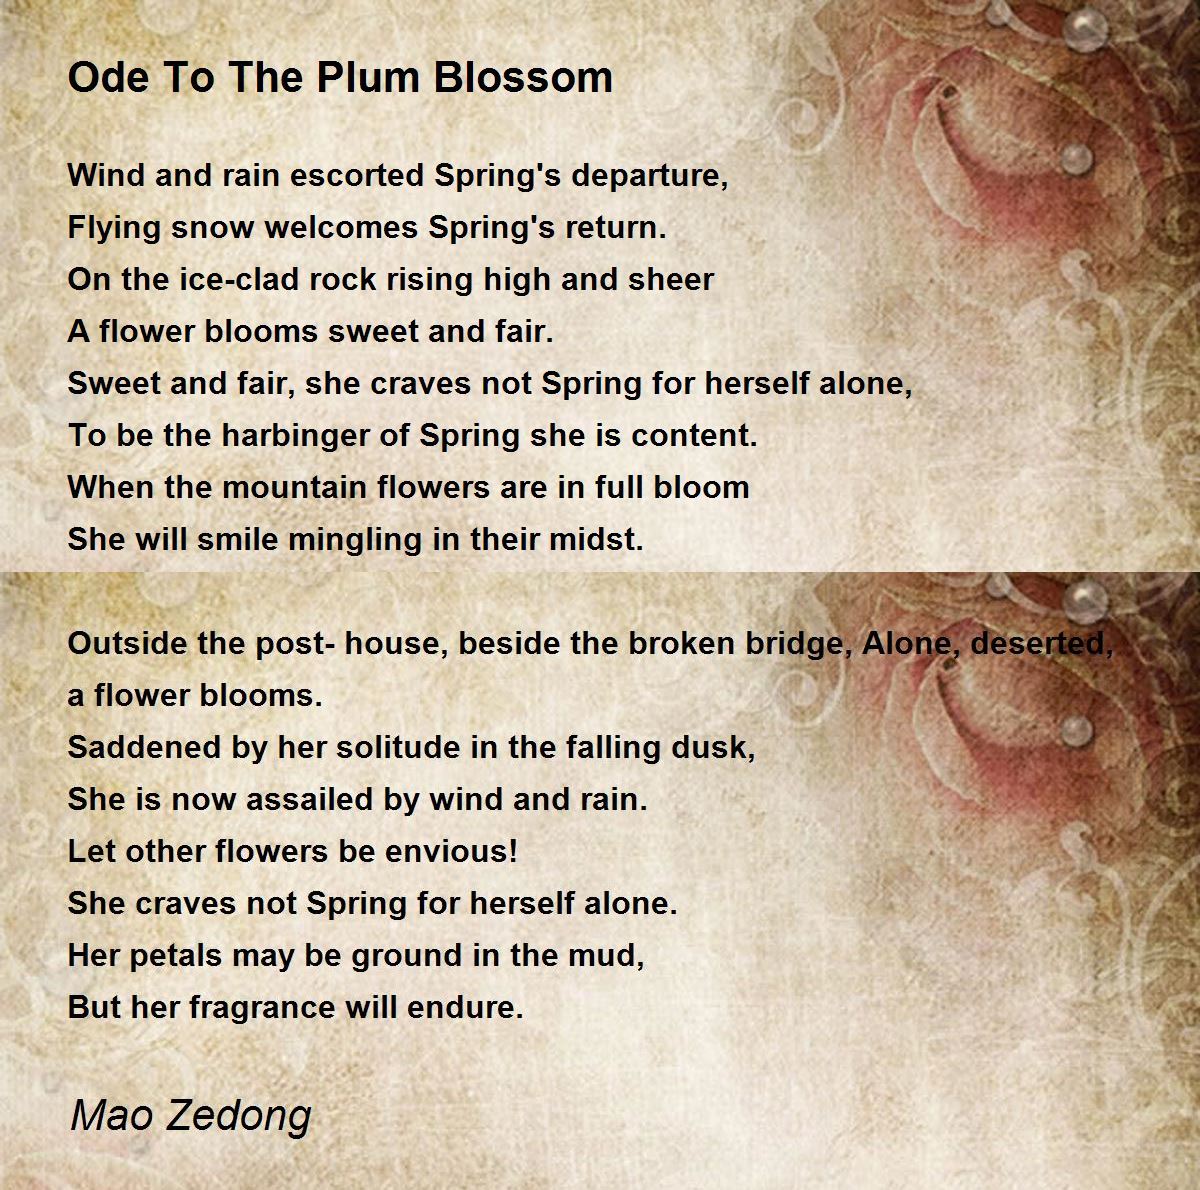 Ode To The Plum Blossom Poem by Mao Zedong - Poem Hunter